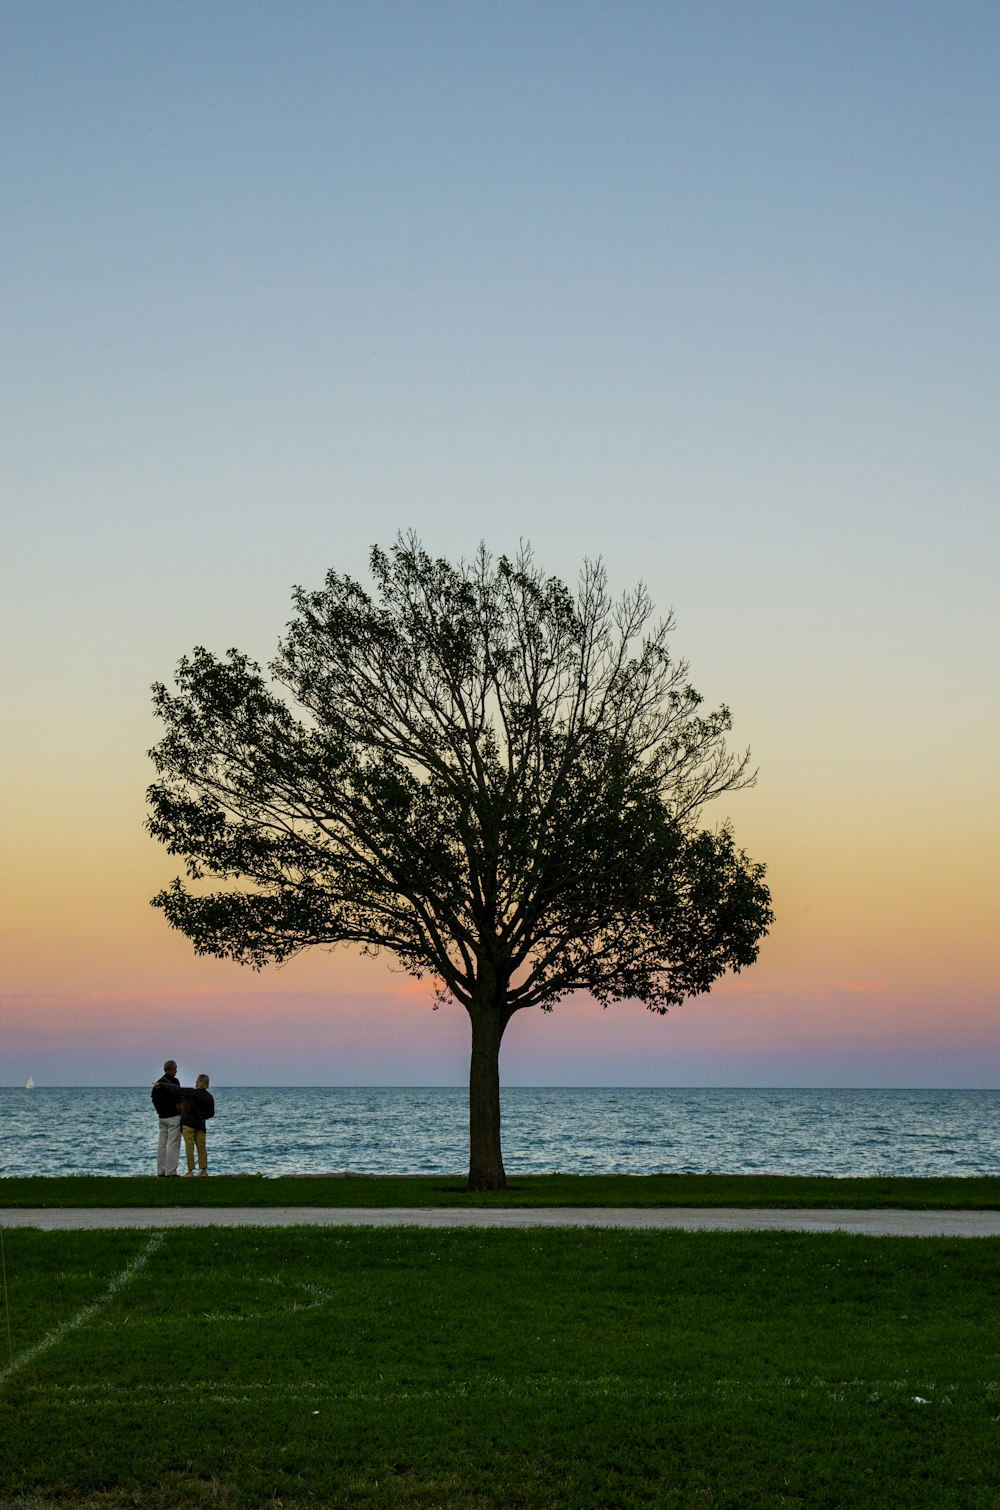 Tree silhouettes against the beach protects lovers who hold each other close